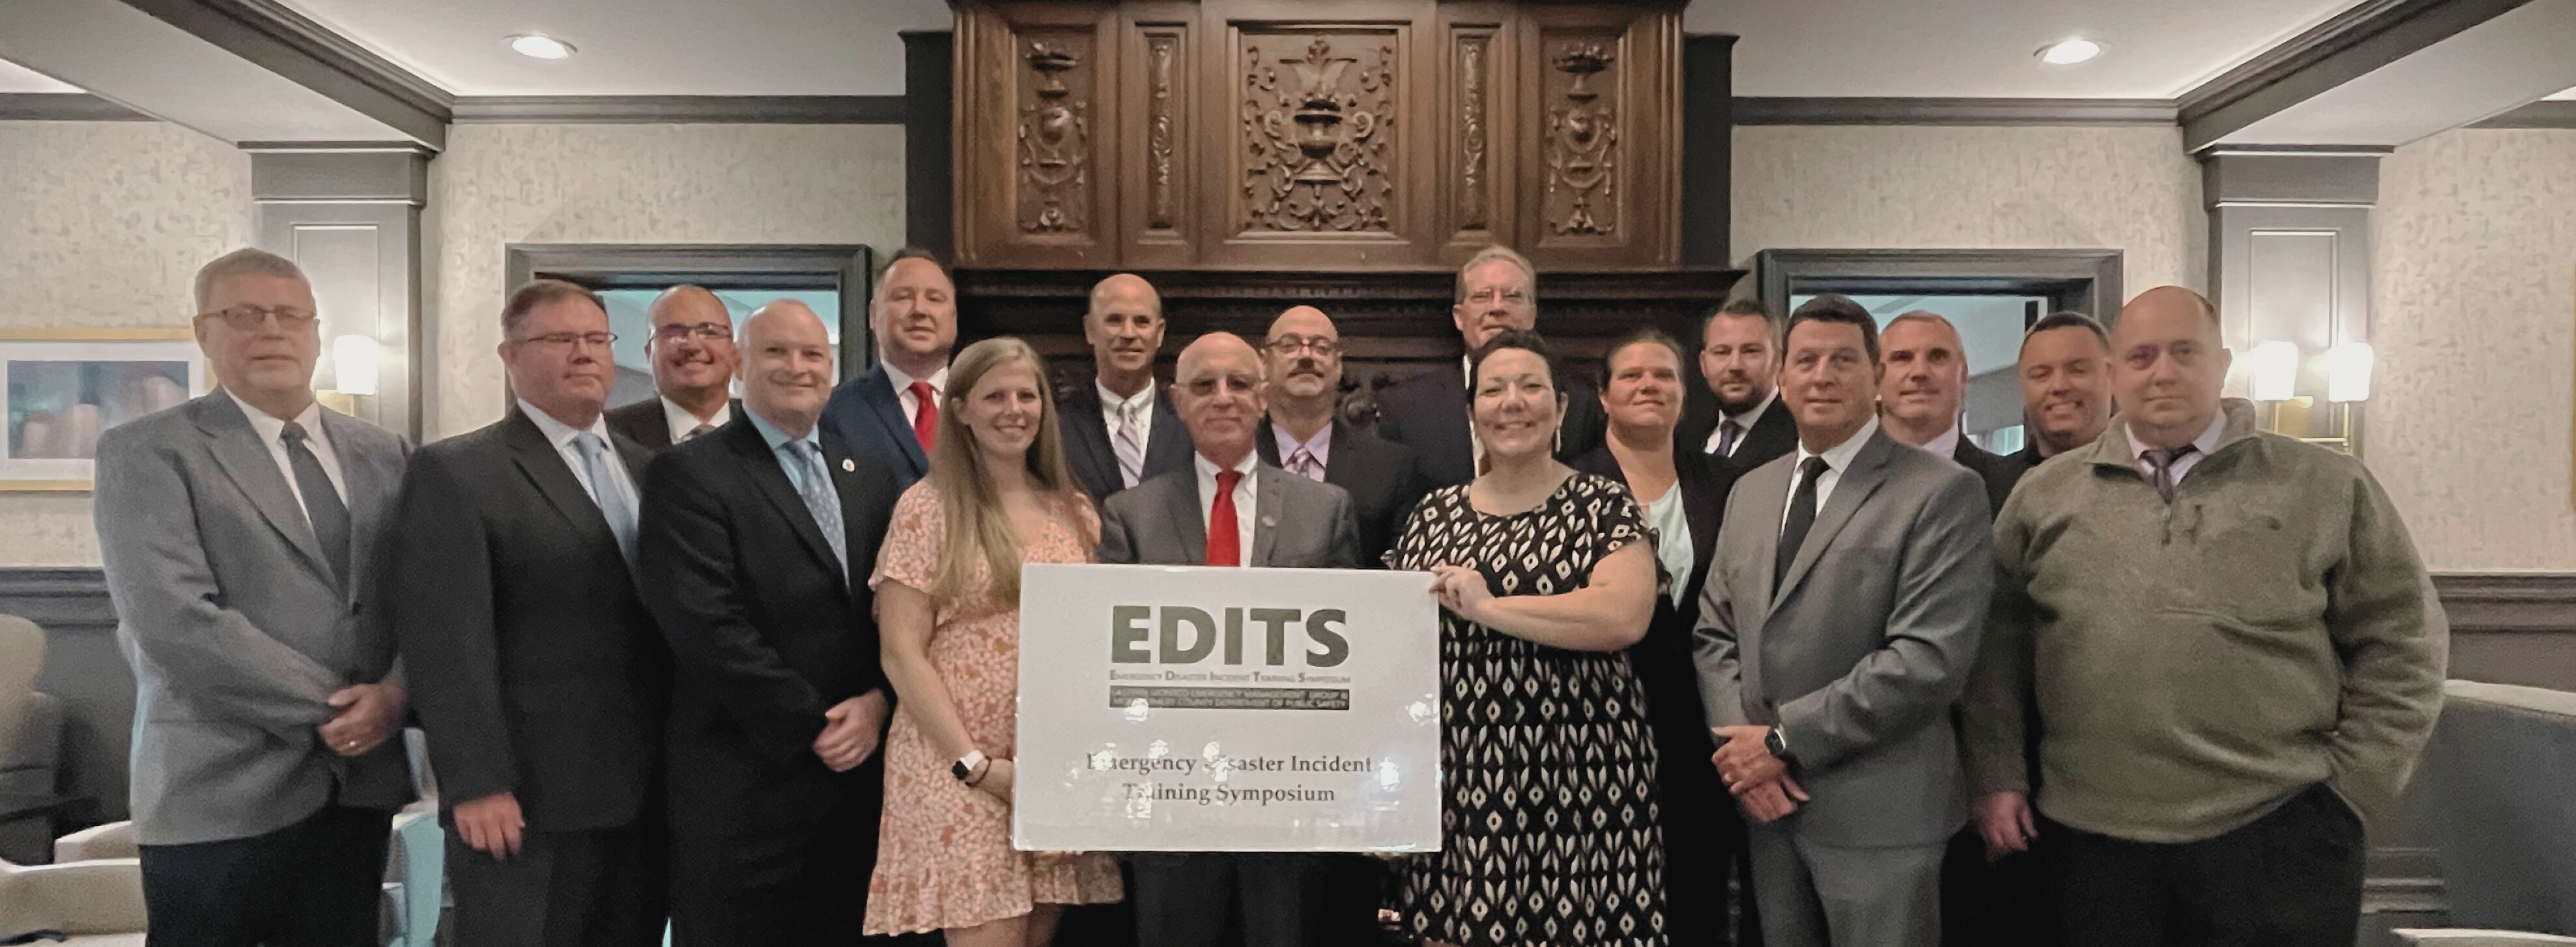 2022 EDITS Planning Committee members standing together in front of a fireplace holding a sign that says EDITS